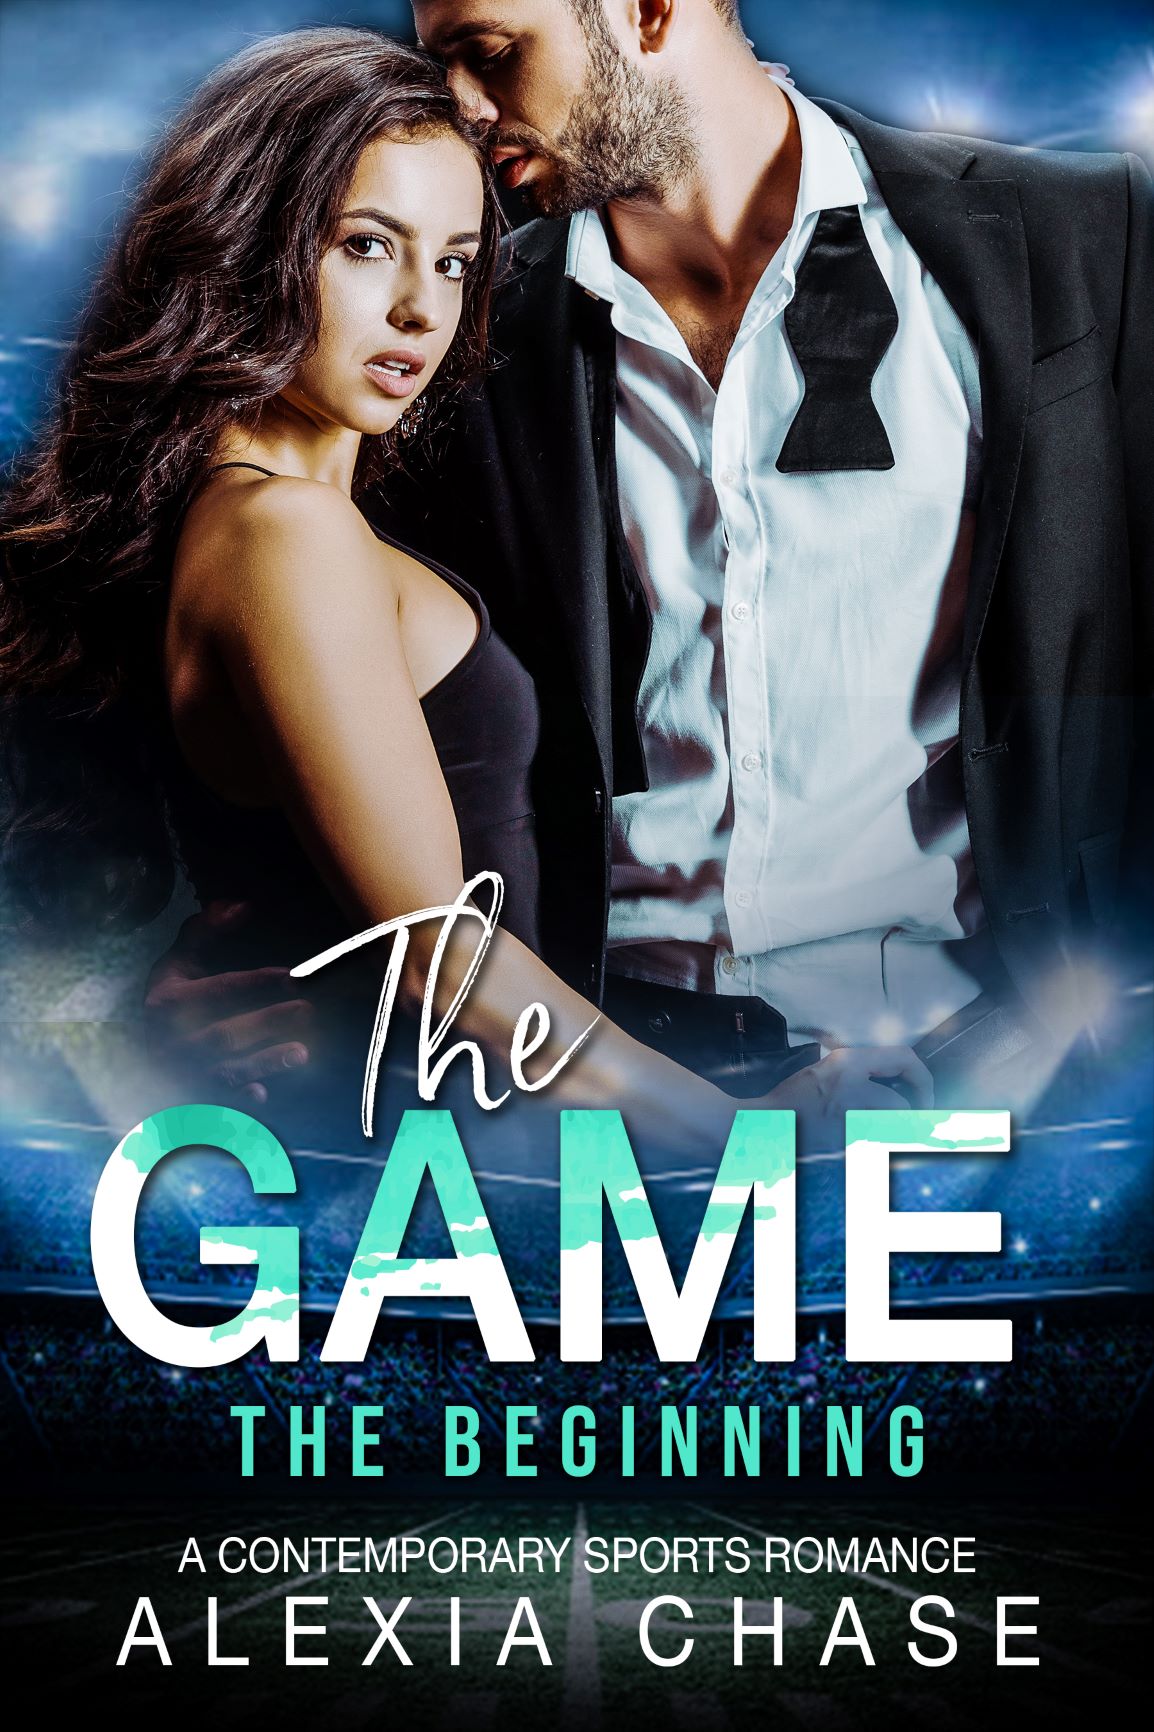 FREE: The Game – The Beginning: A Contemporary Sports Romance: A Sinfully Tempting Series – A First Look by Alexia Chase